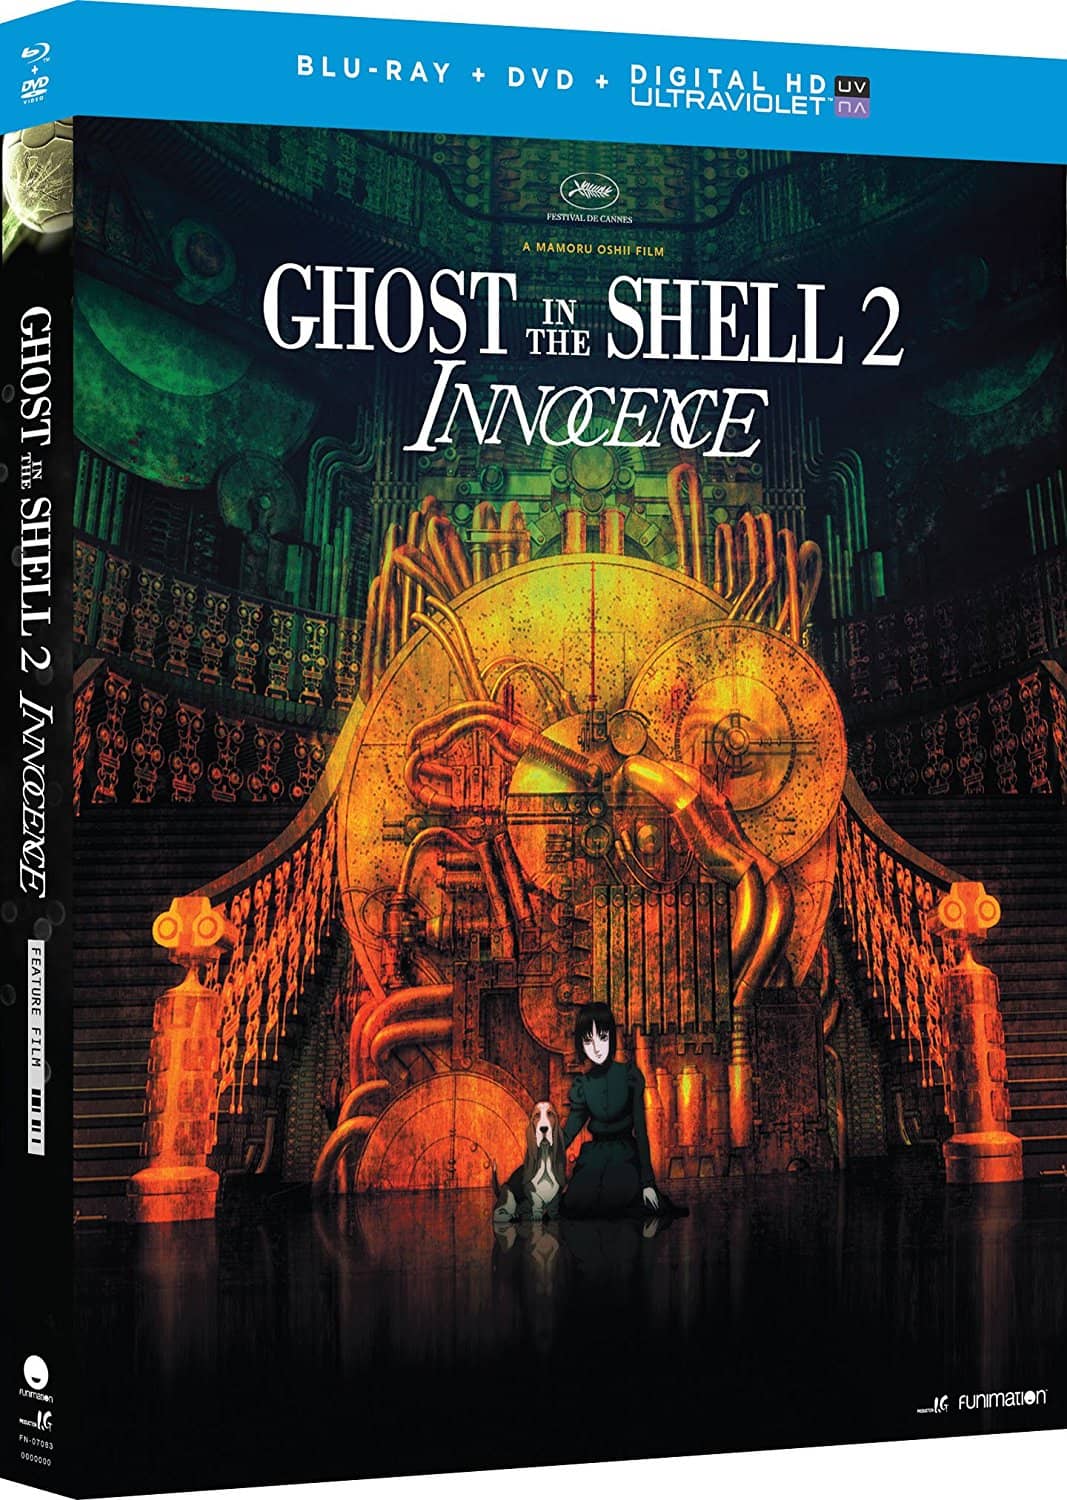 GHOST IN THE SHELL 2 INNOCENCE. BLU-RAY